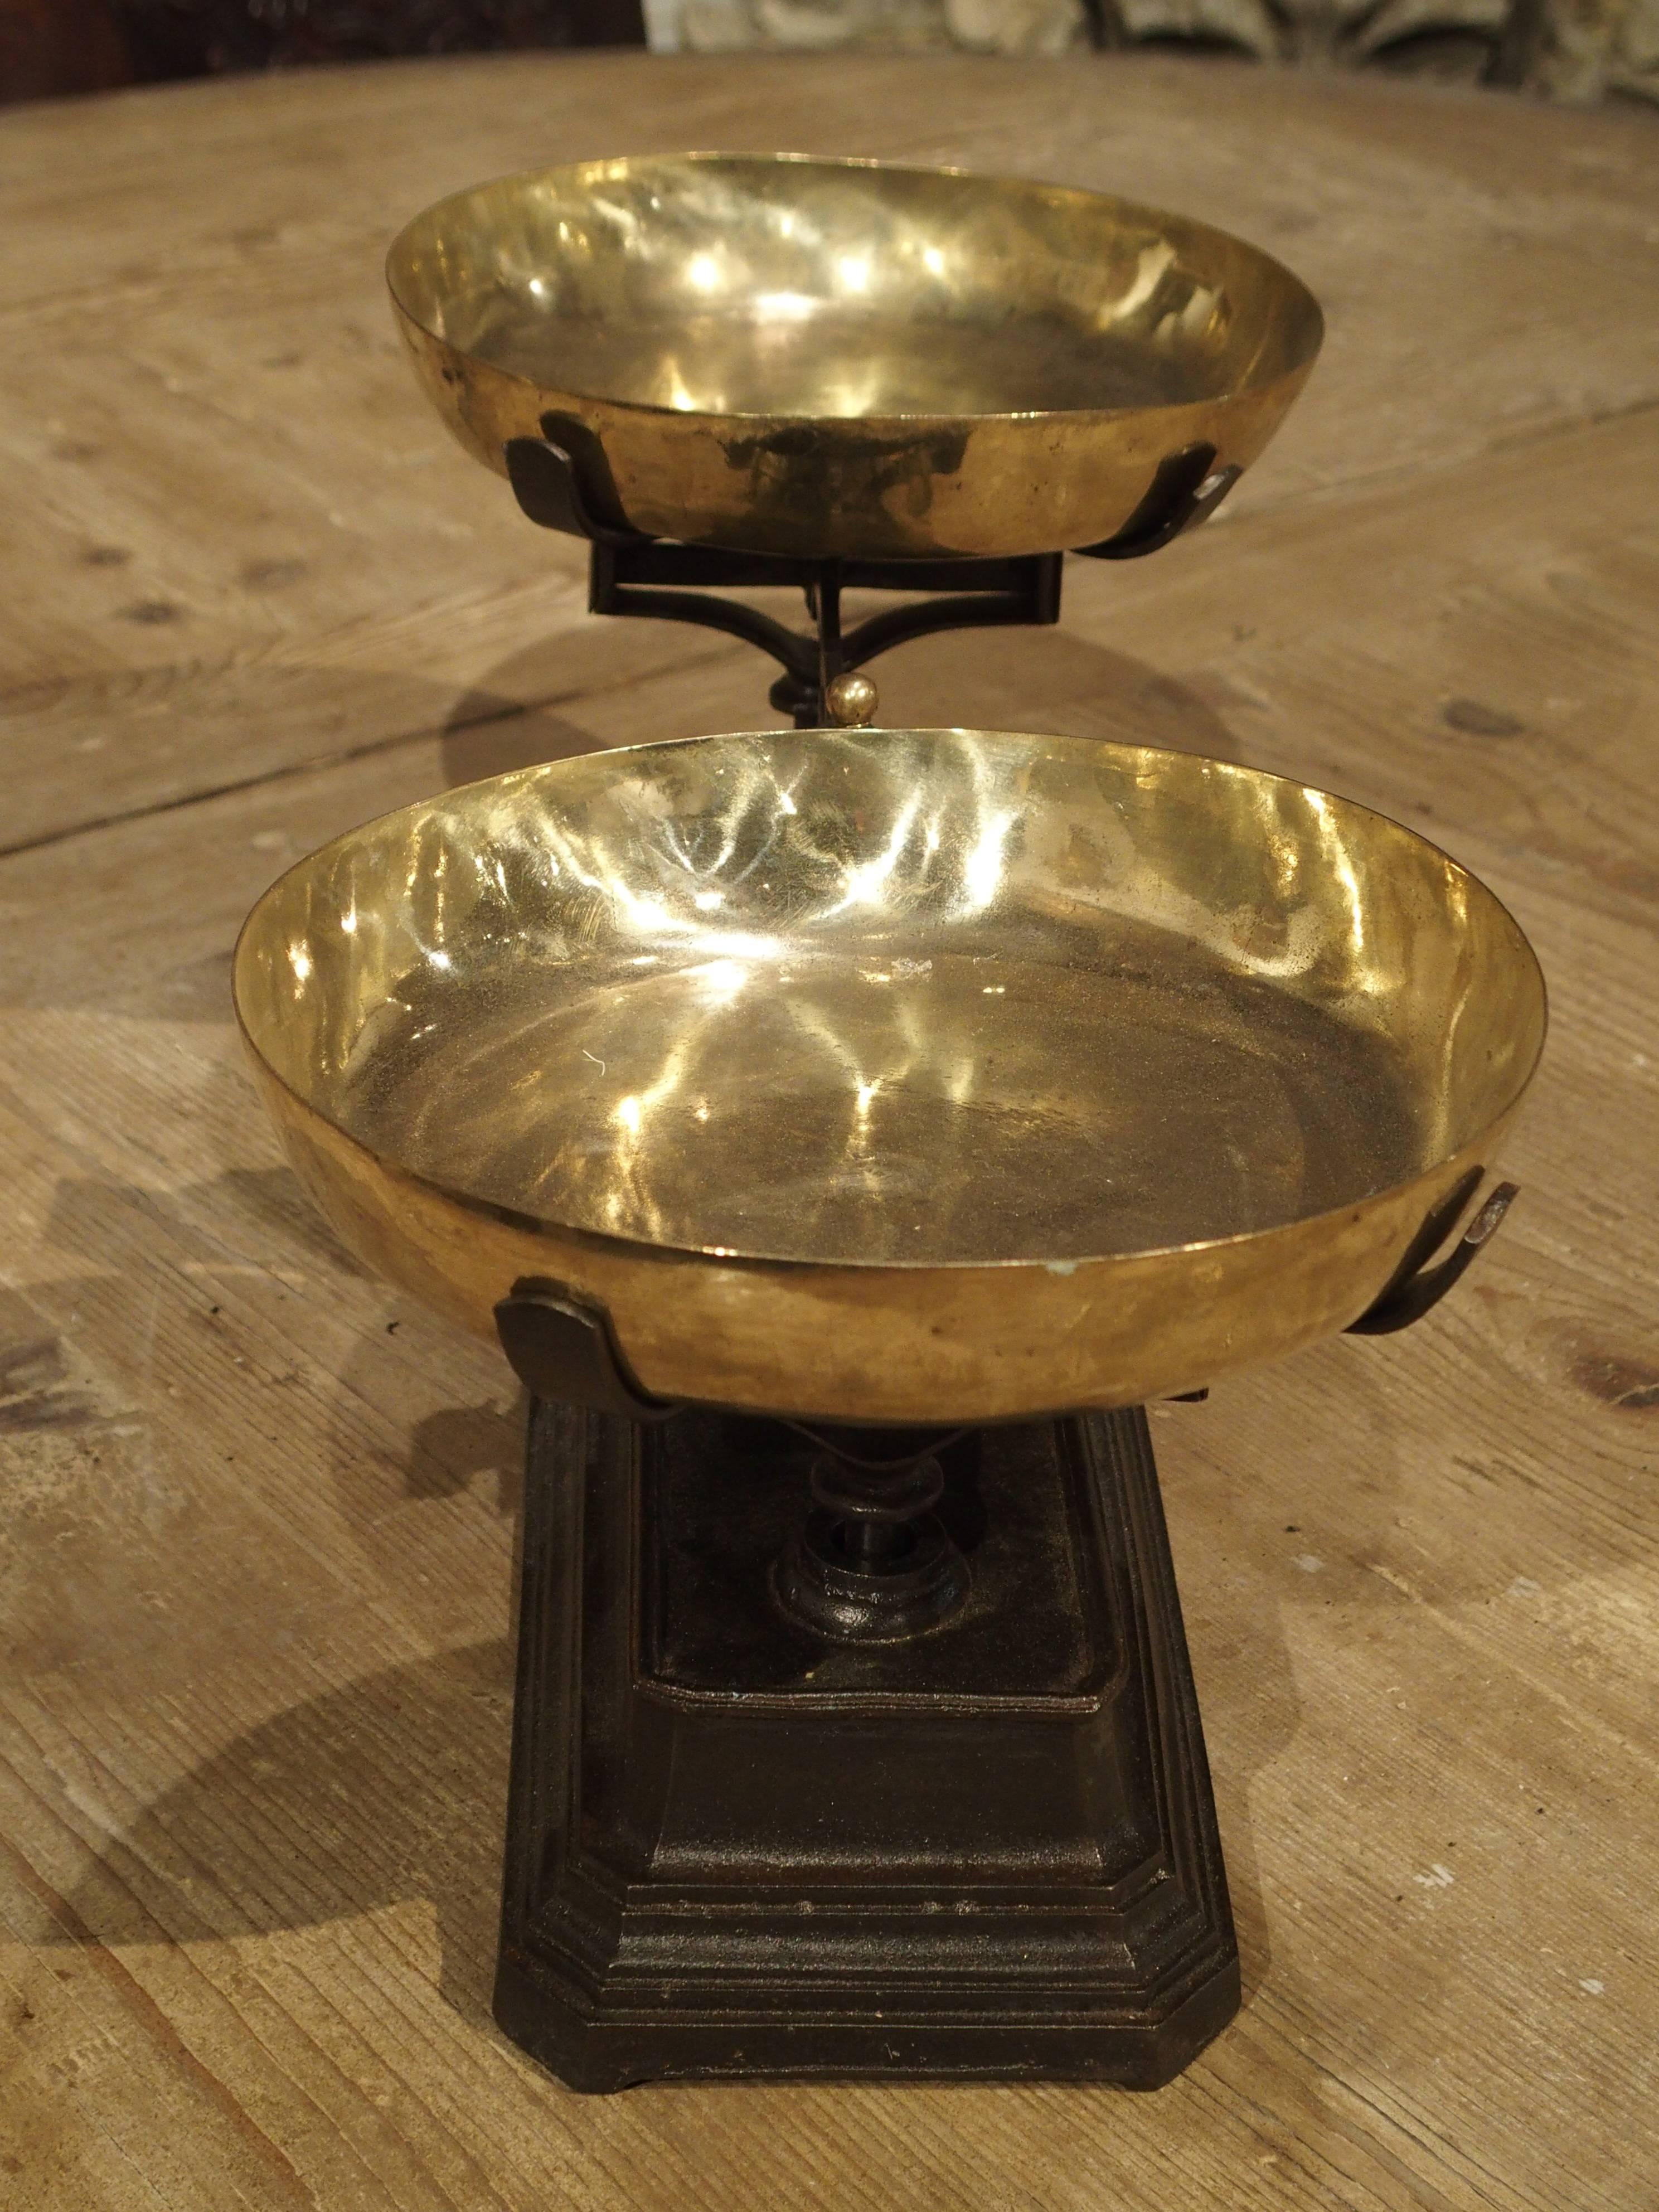 19th Century Antique 10 Kilogram Scale from France, circa 1900